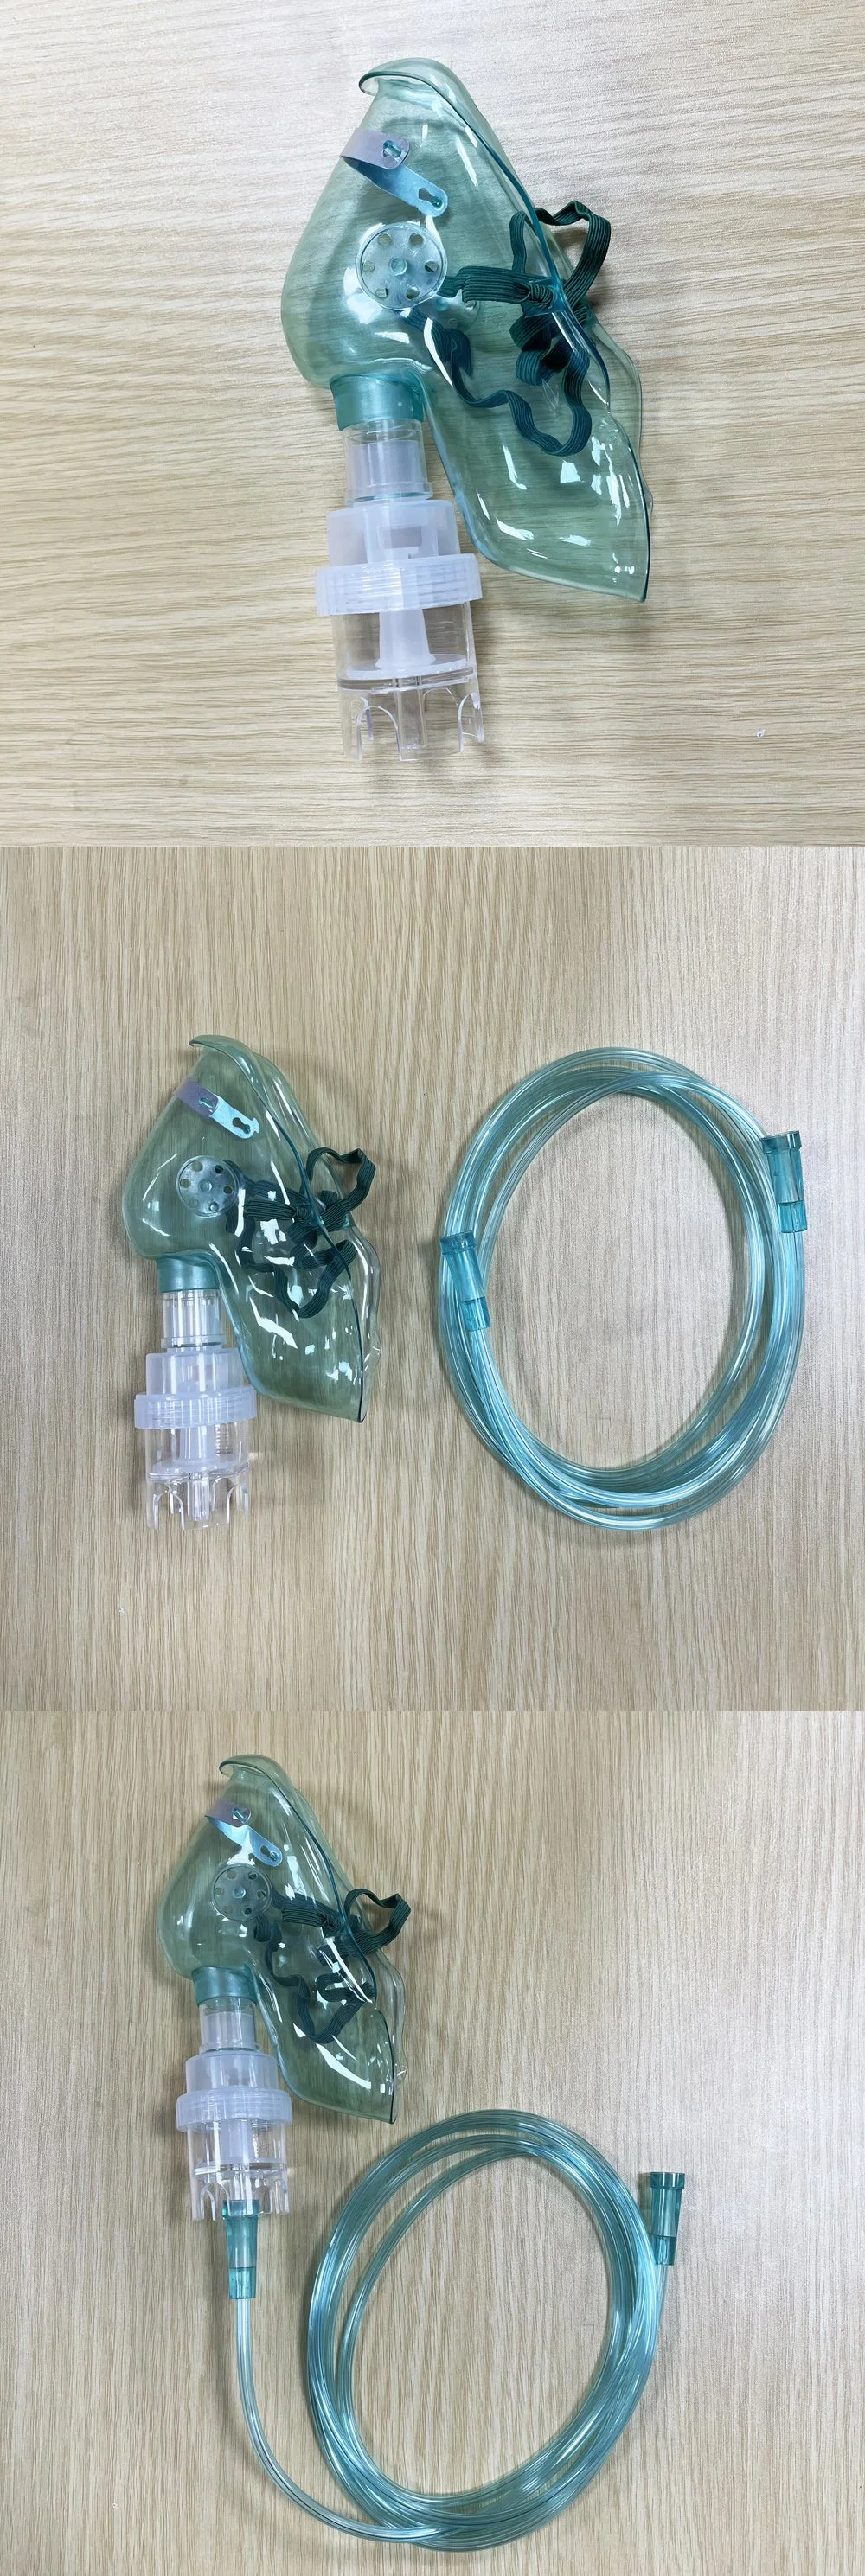 High Quality Medical Portable PVC Nebulizer Mask with Oxygen Tube Size S, M, L, XL with 10cc Nebulizer Cup for Hospital Green